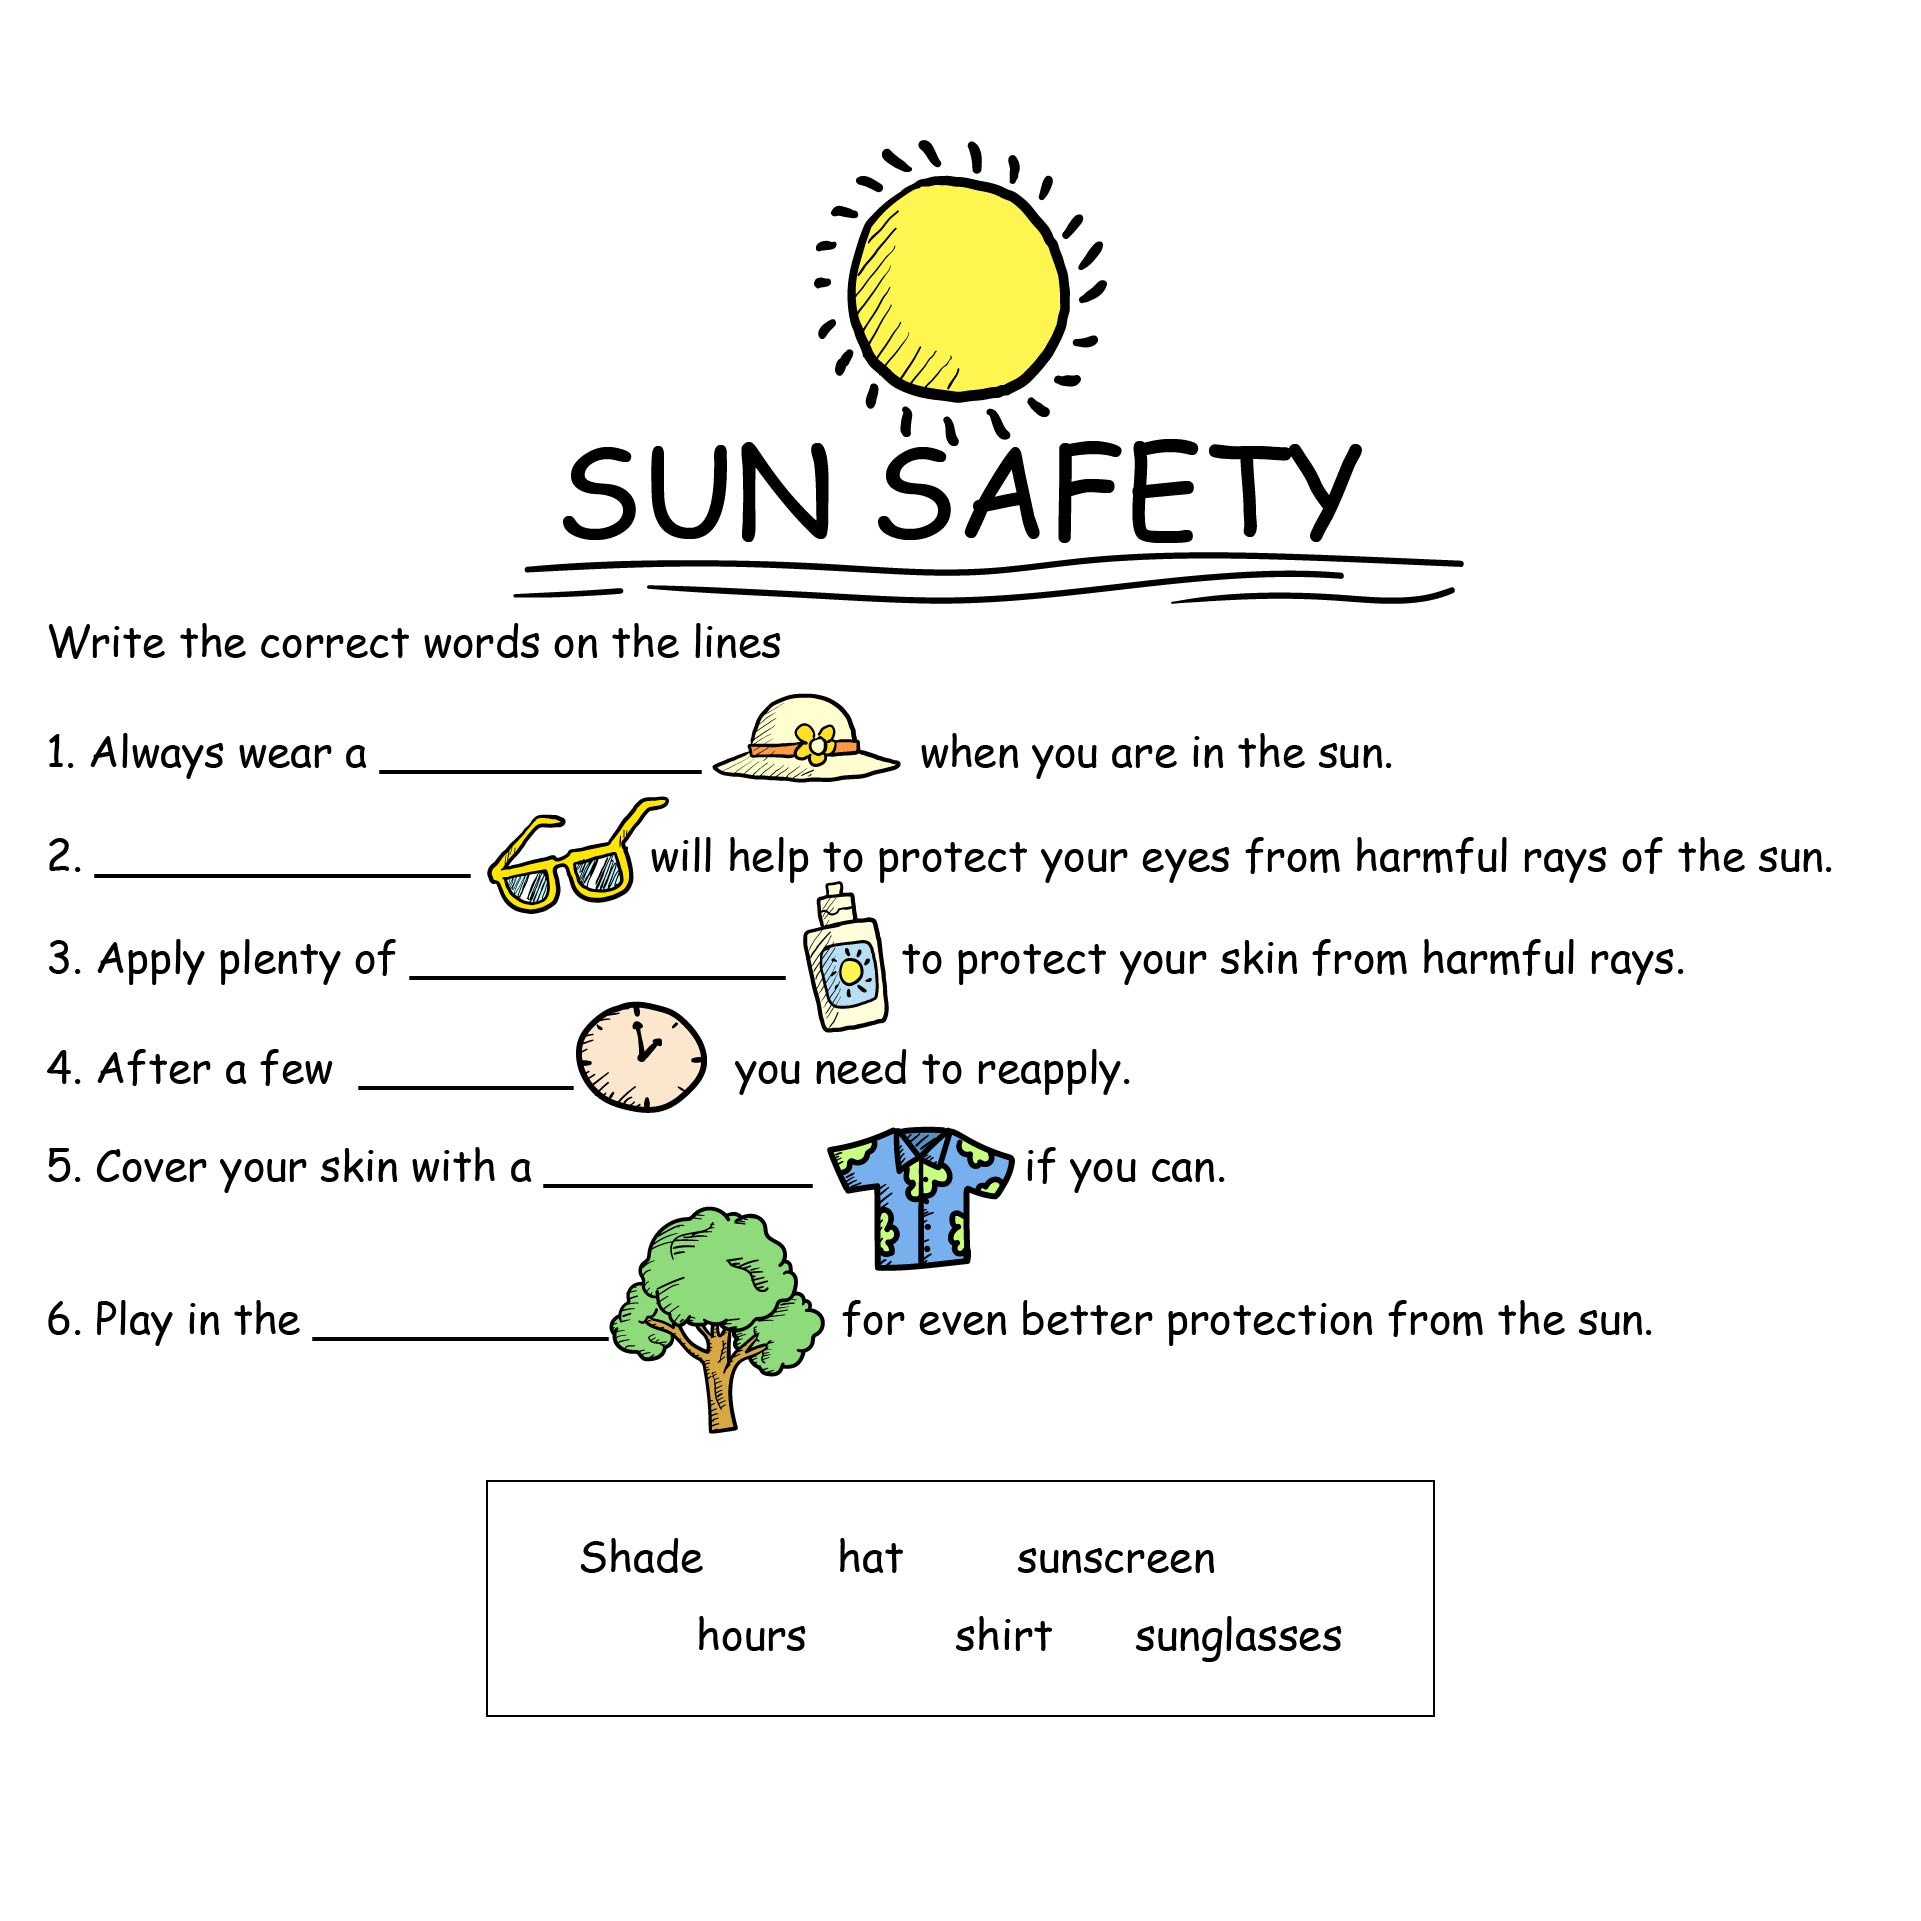  The Sun Worksheet For Kids Free Download Gambr co